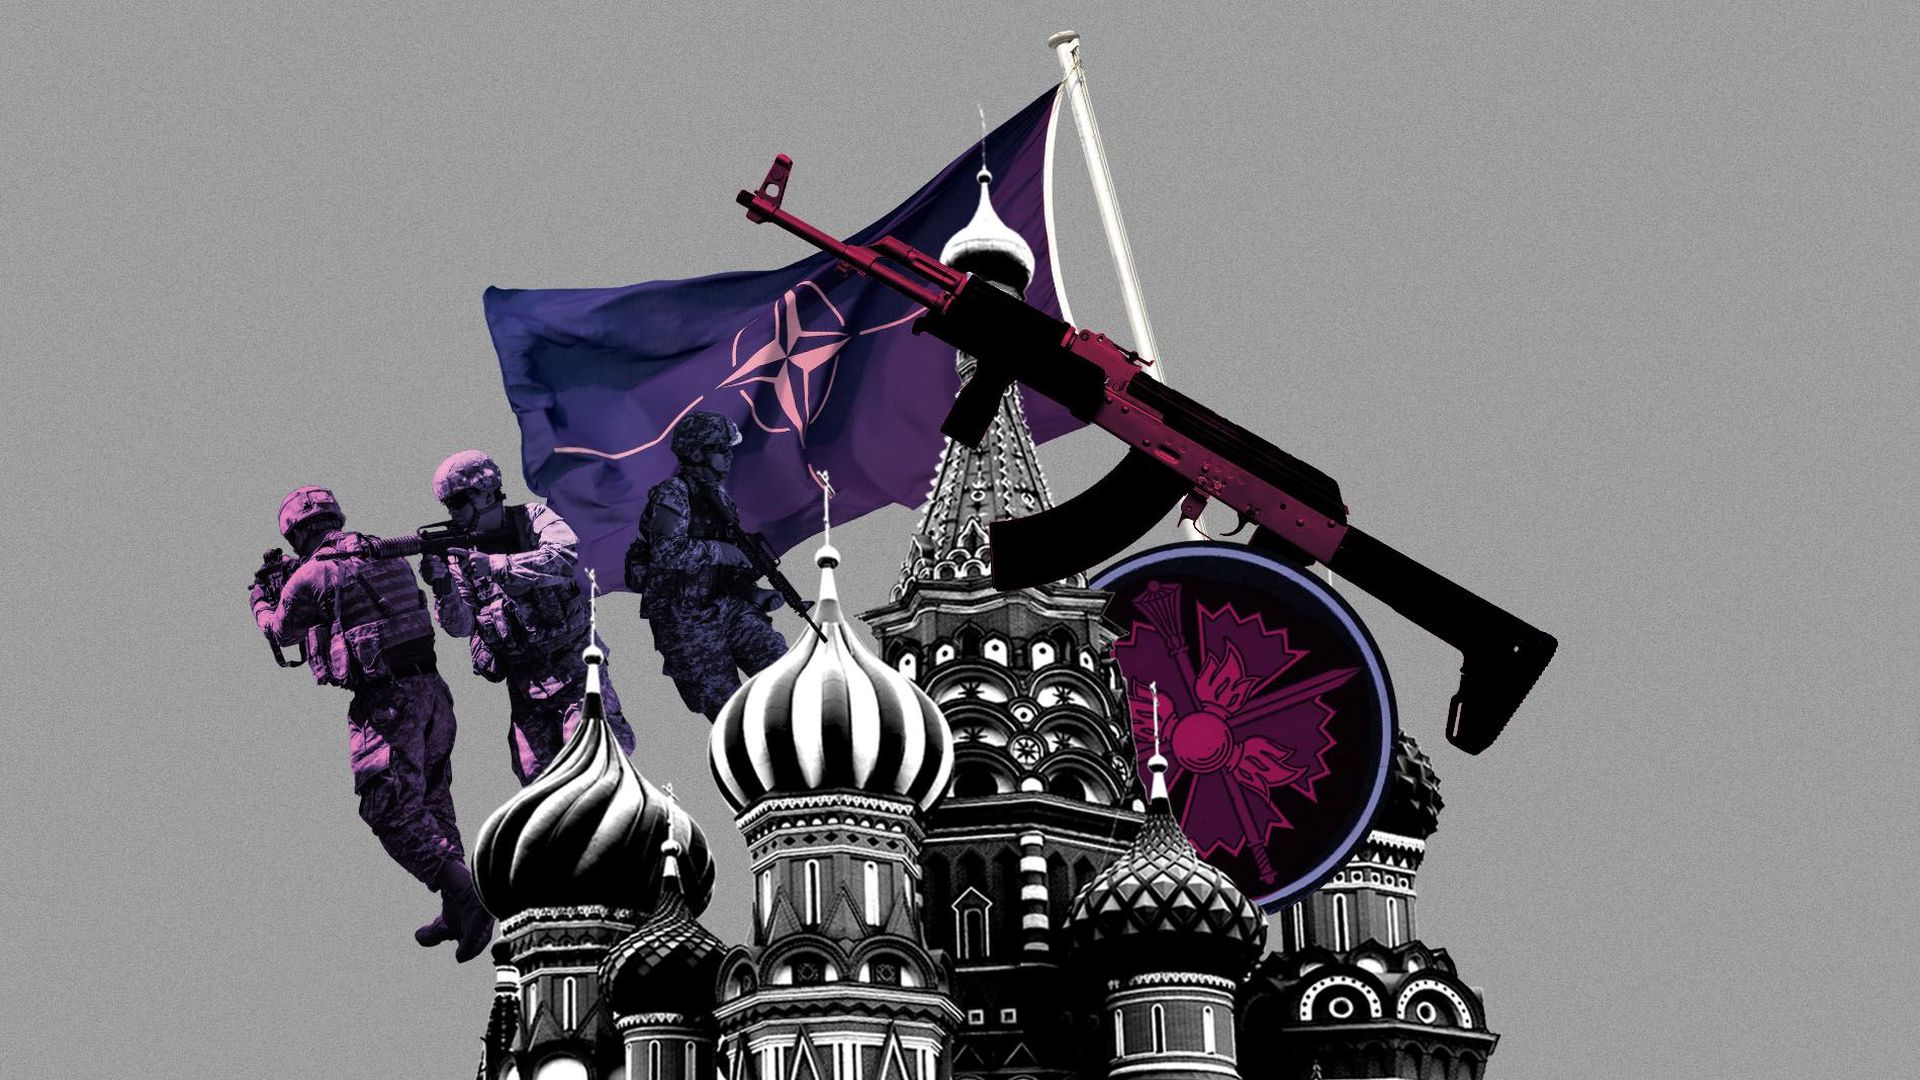 Illustration of saint basil's cathedral surrounded by the GRU symbol, a NATO flag, a gun, and U.S. troops